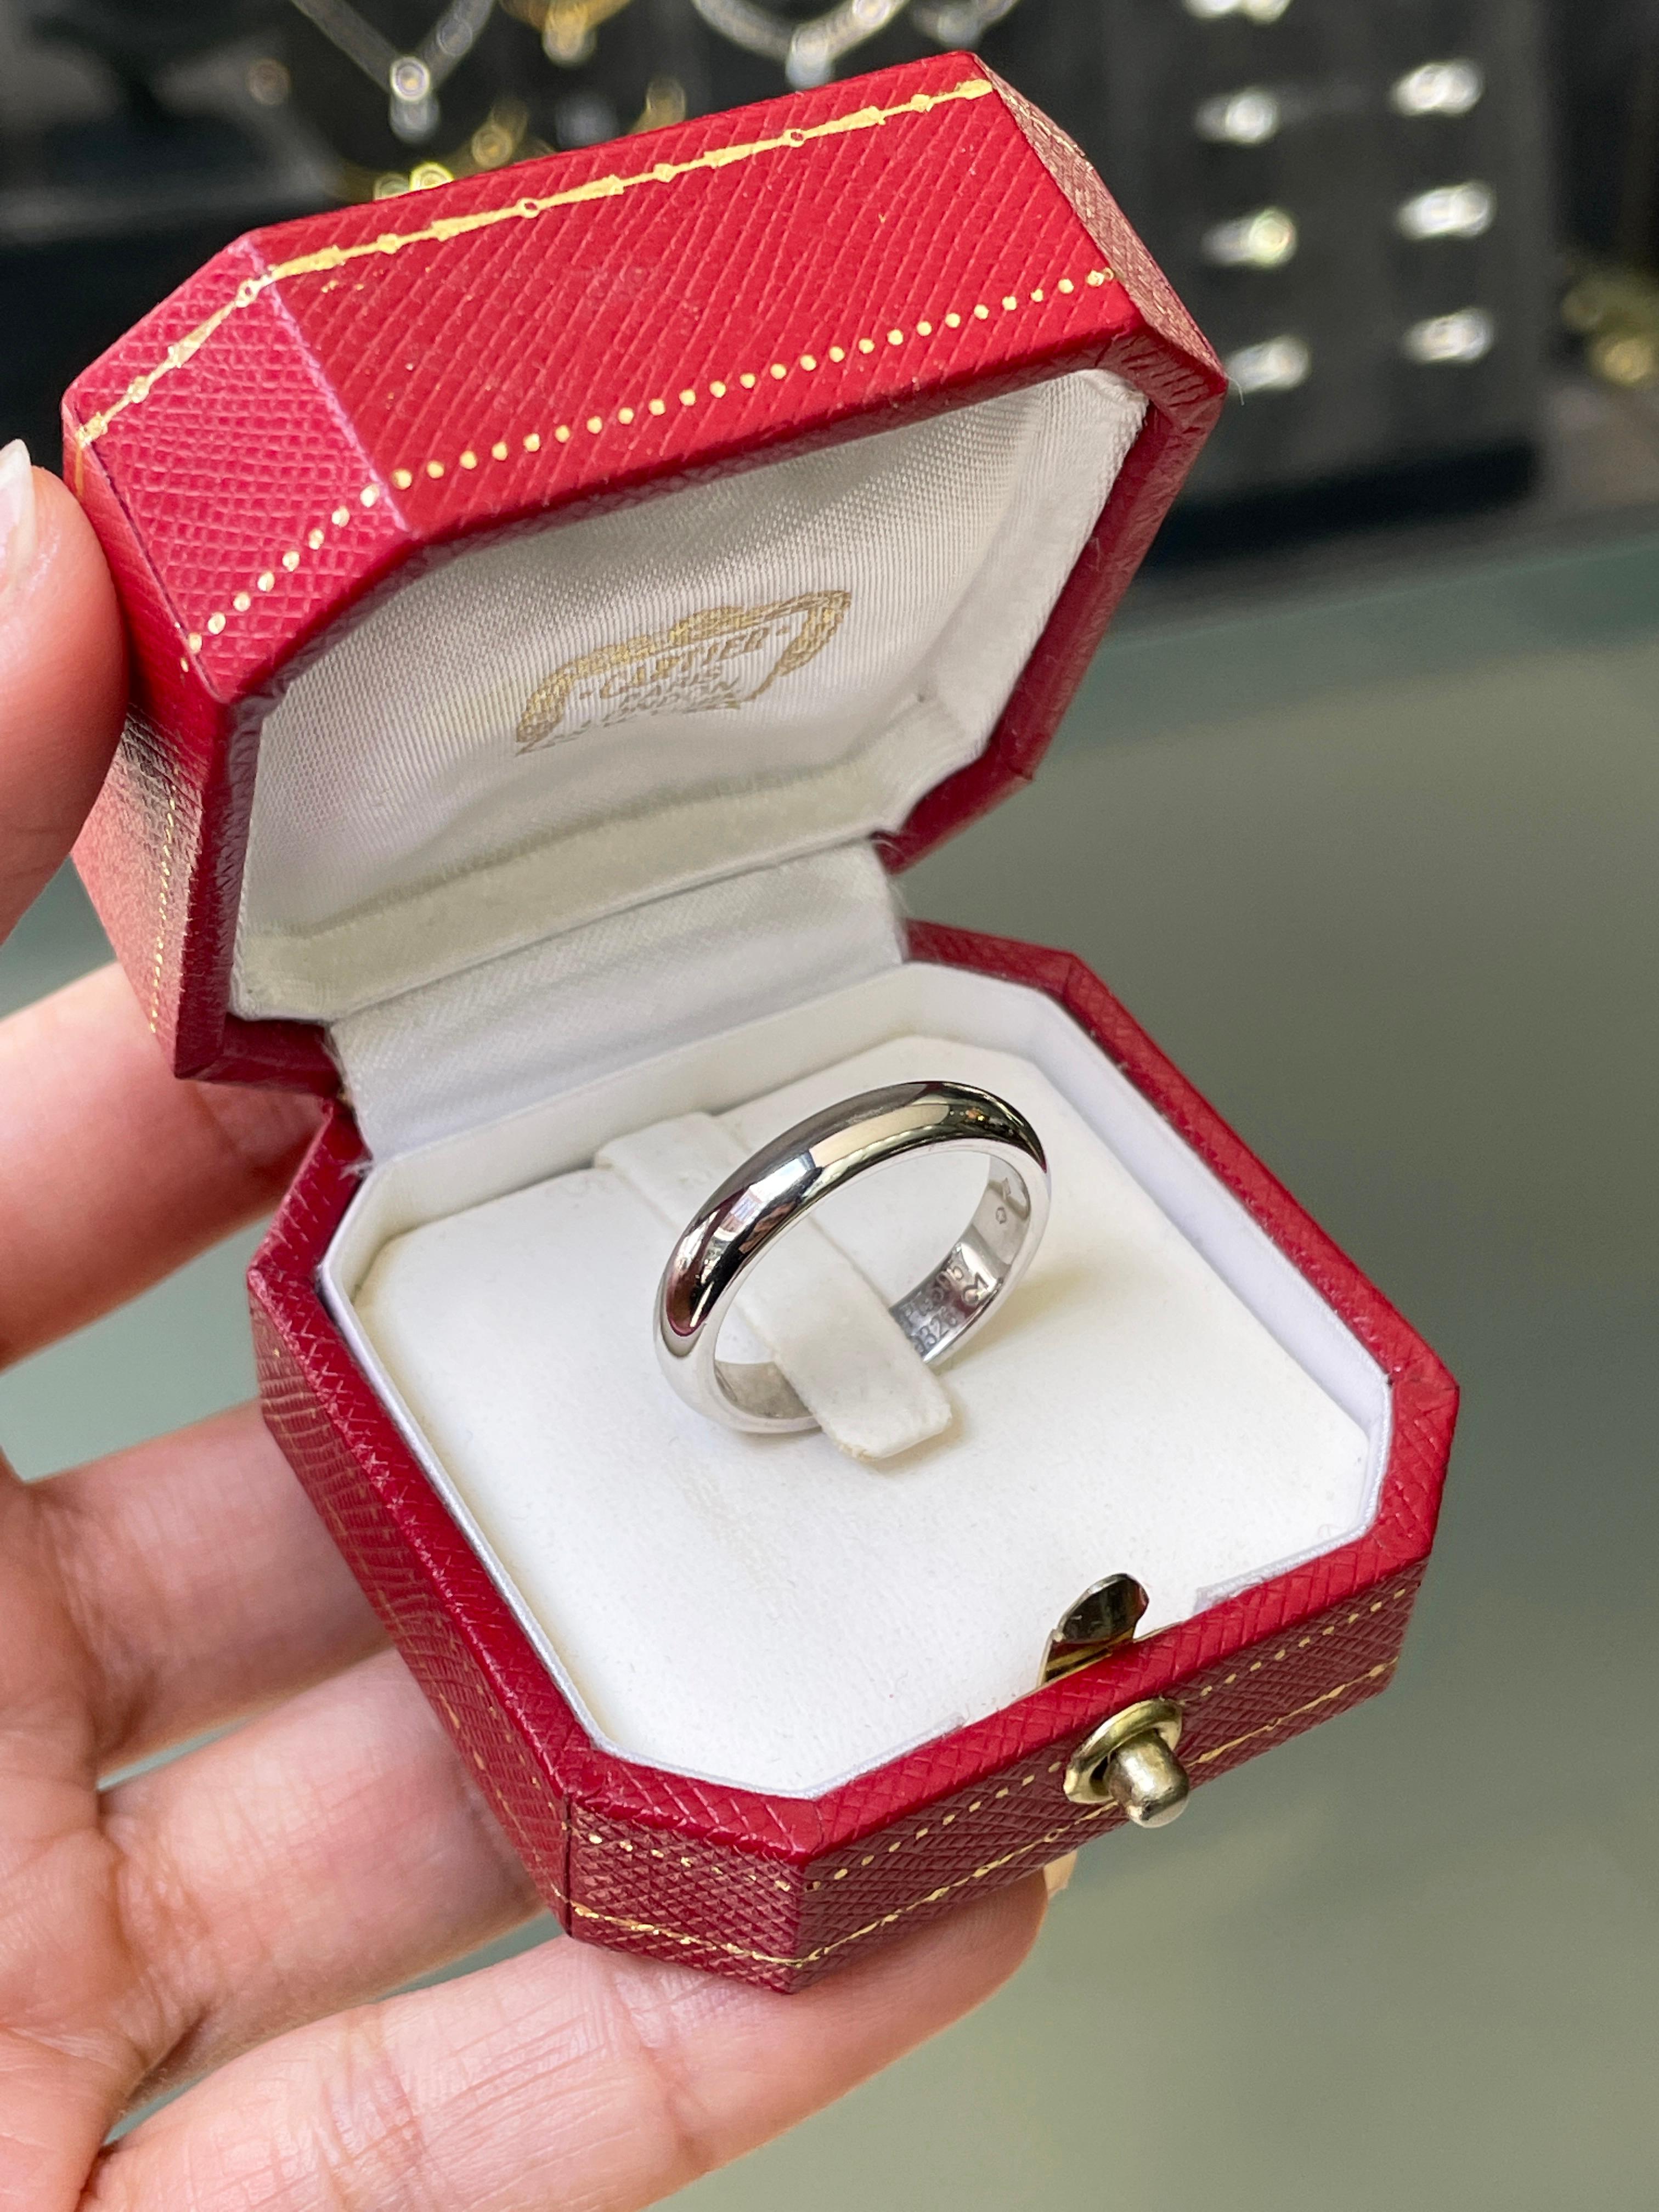 This classic D shape wedding band by Cartier from their '1895' collection is crafted from platinum, measures 4mm in width and has a gross weight of 9.04 grams. A perfect timeless piece to celebrate eternal love and marriage. UK finger size 'N 1/2'.